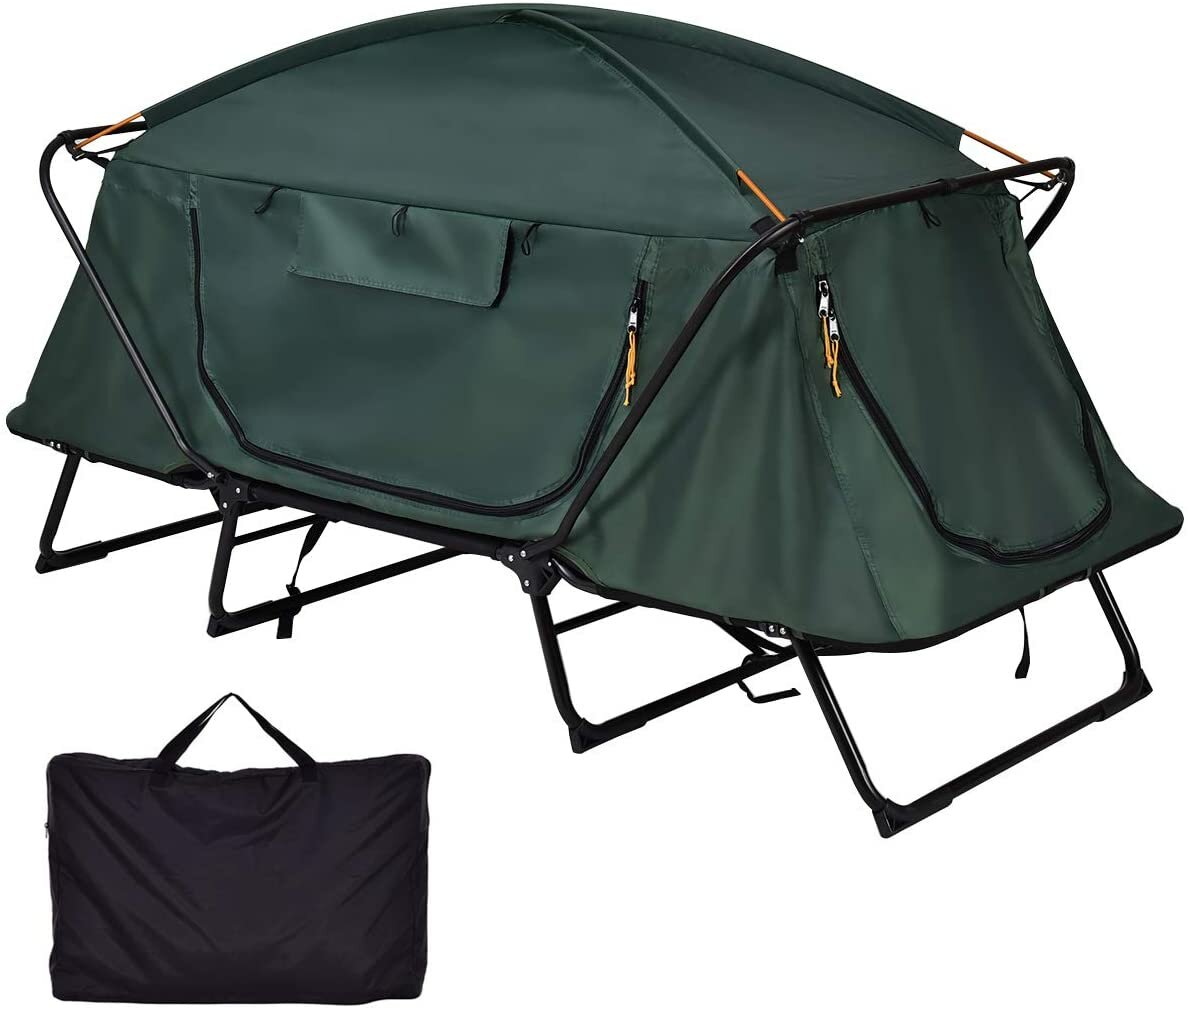 Kamp-Rite Compact Tent cot (CTC) Double